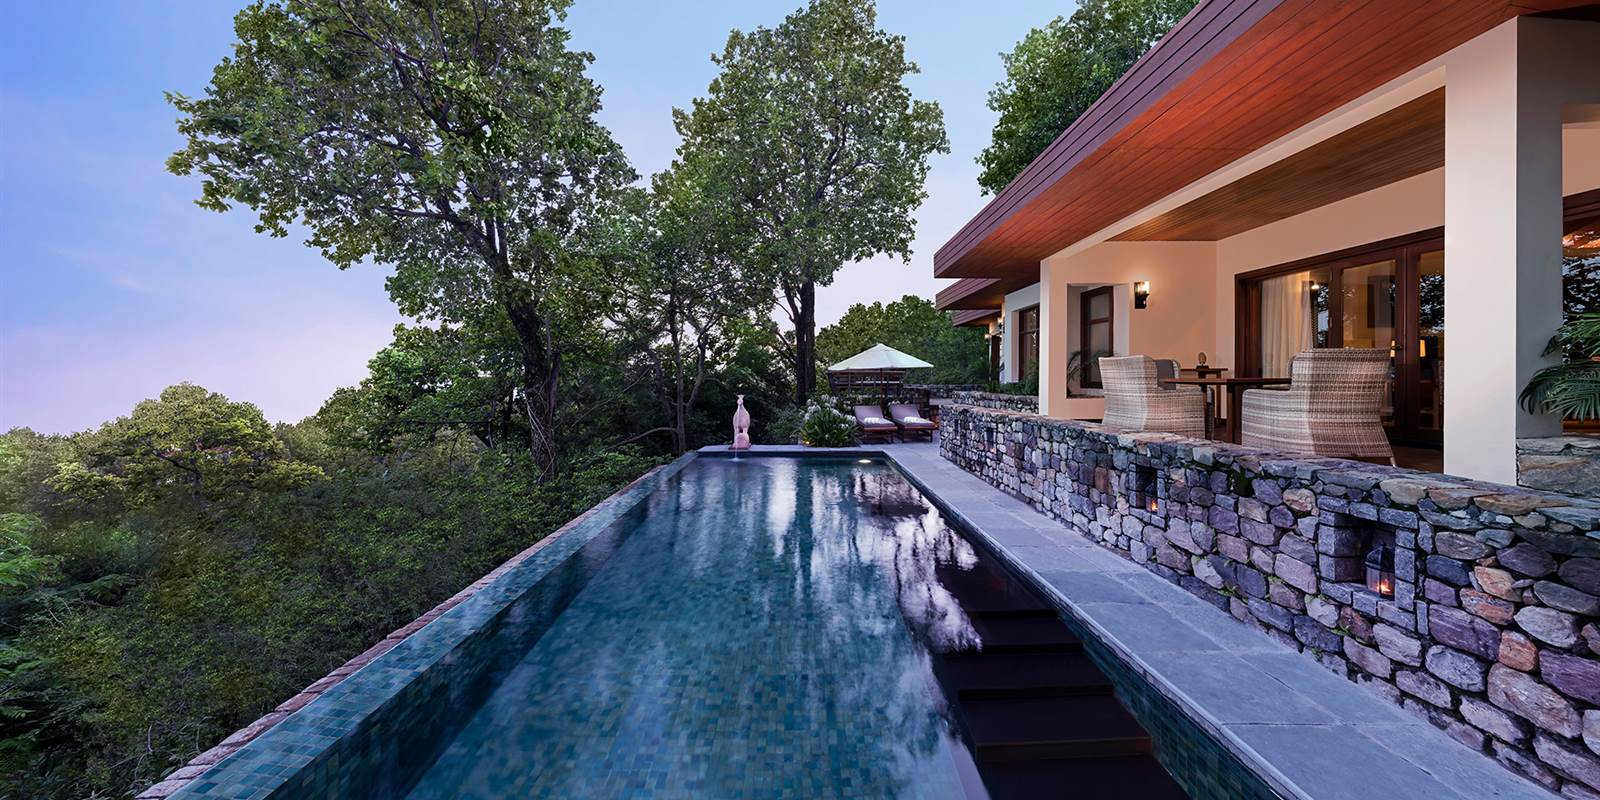 Two Bedroom Villa with Pool in rishikesh, India